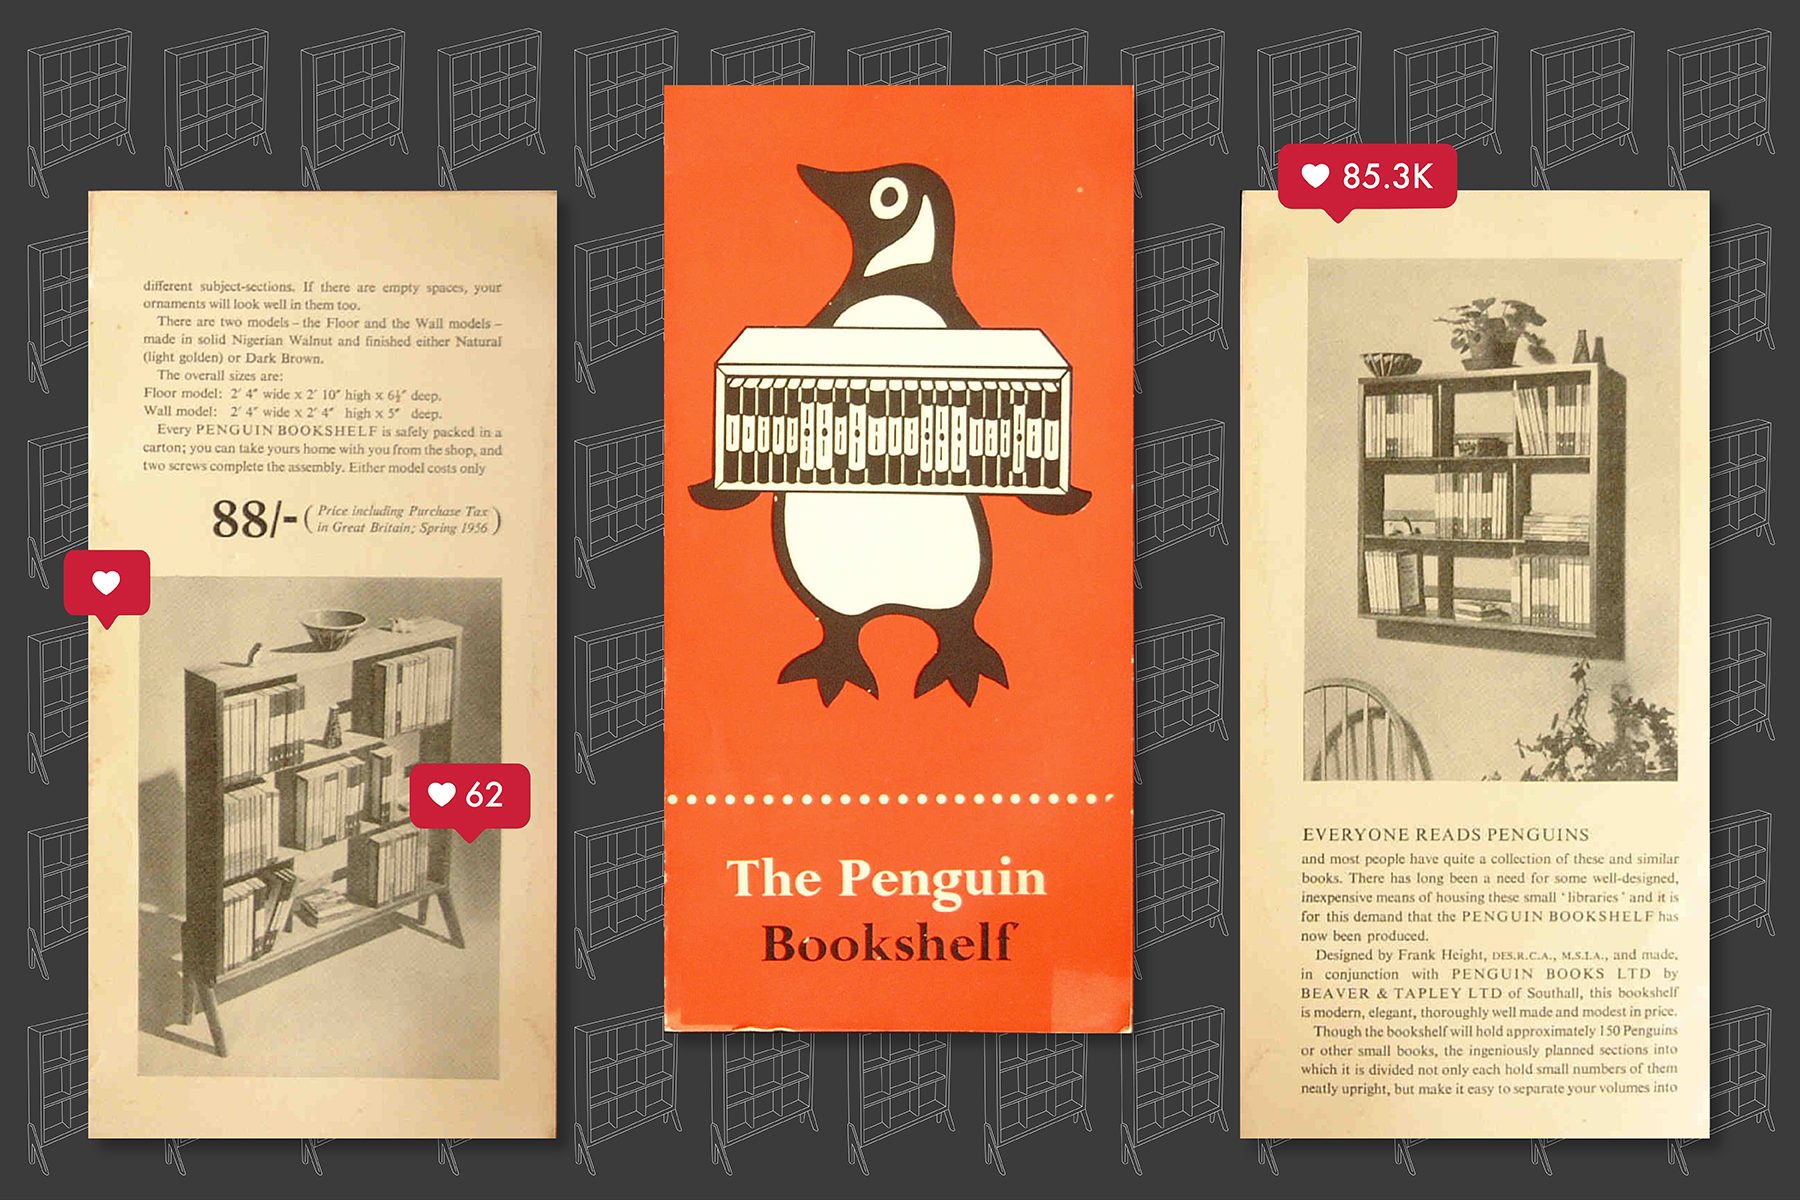 Image of adverts for the Penguin Bookshelf